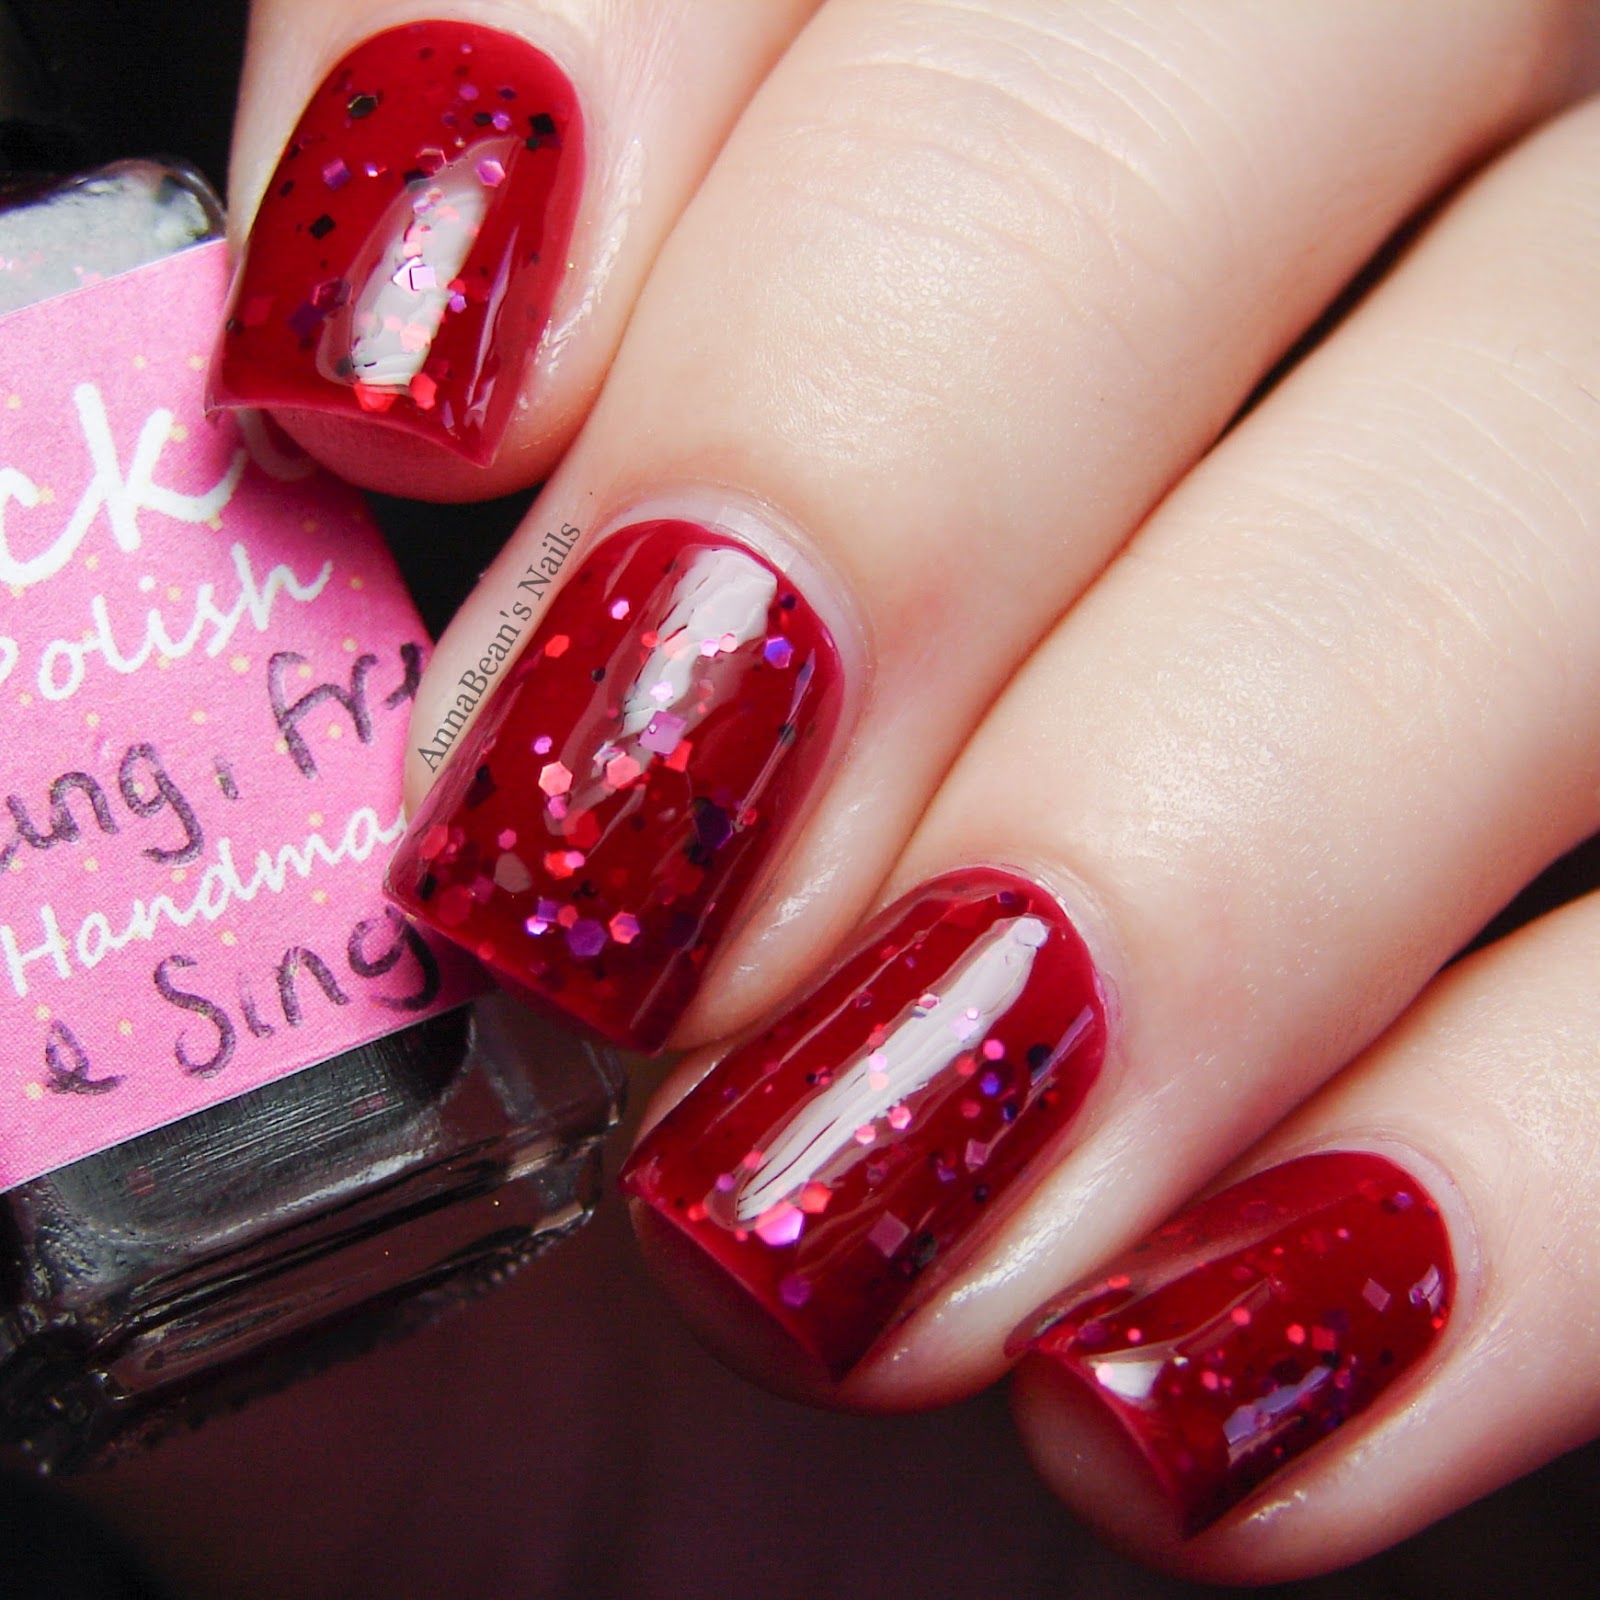 AnnaBean's Nails: Freckles Polish Swatches & Review